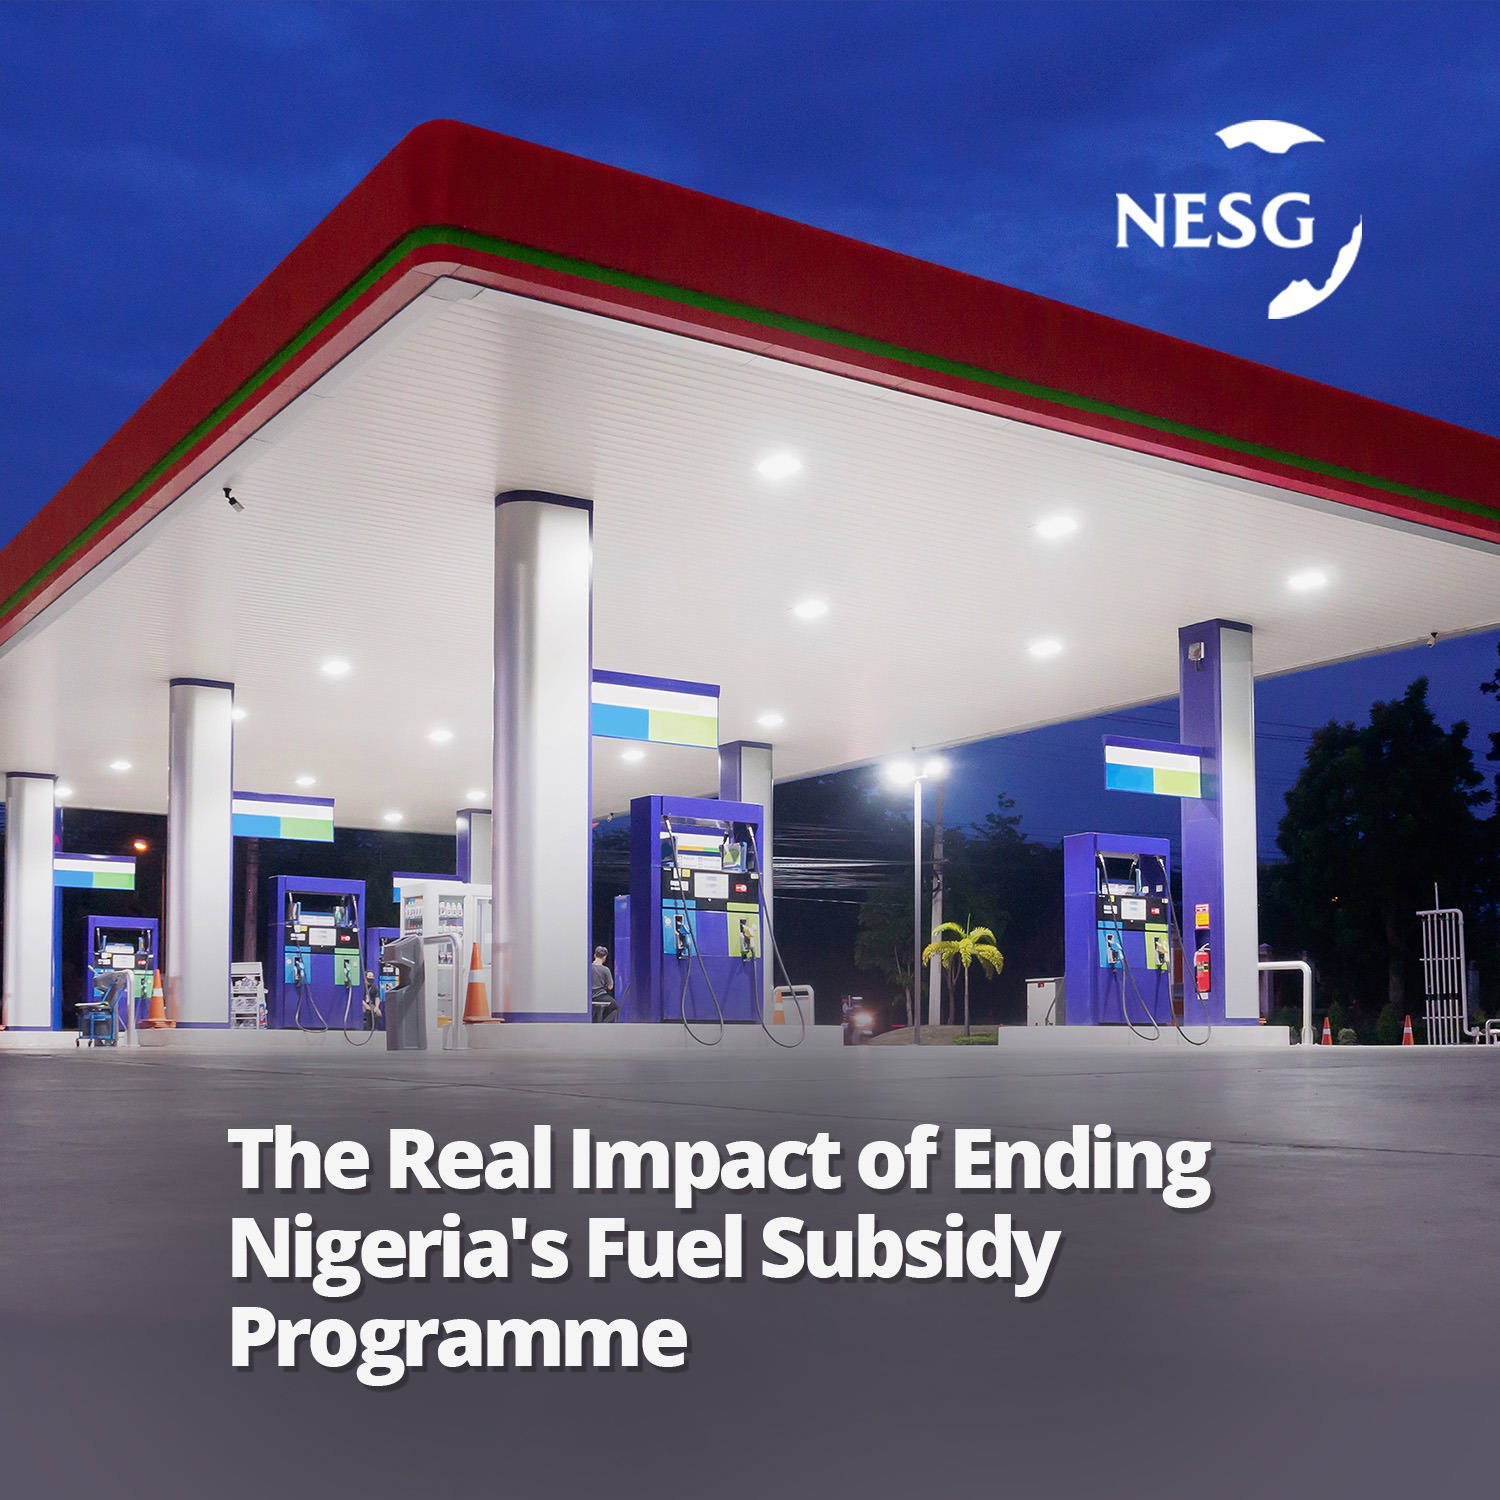 The Real Impact of Ending Nigeria's Fuel Subsidy Programme